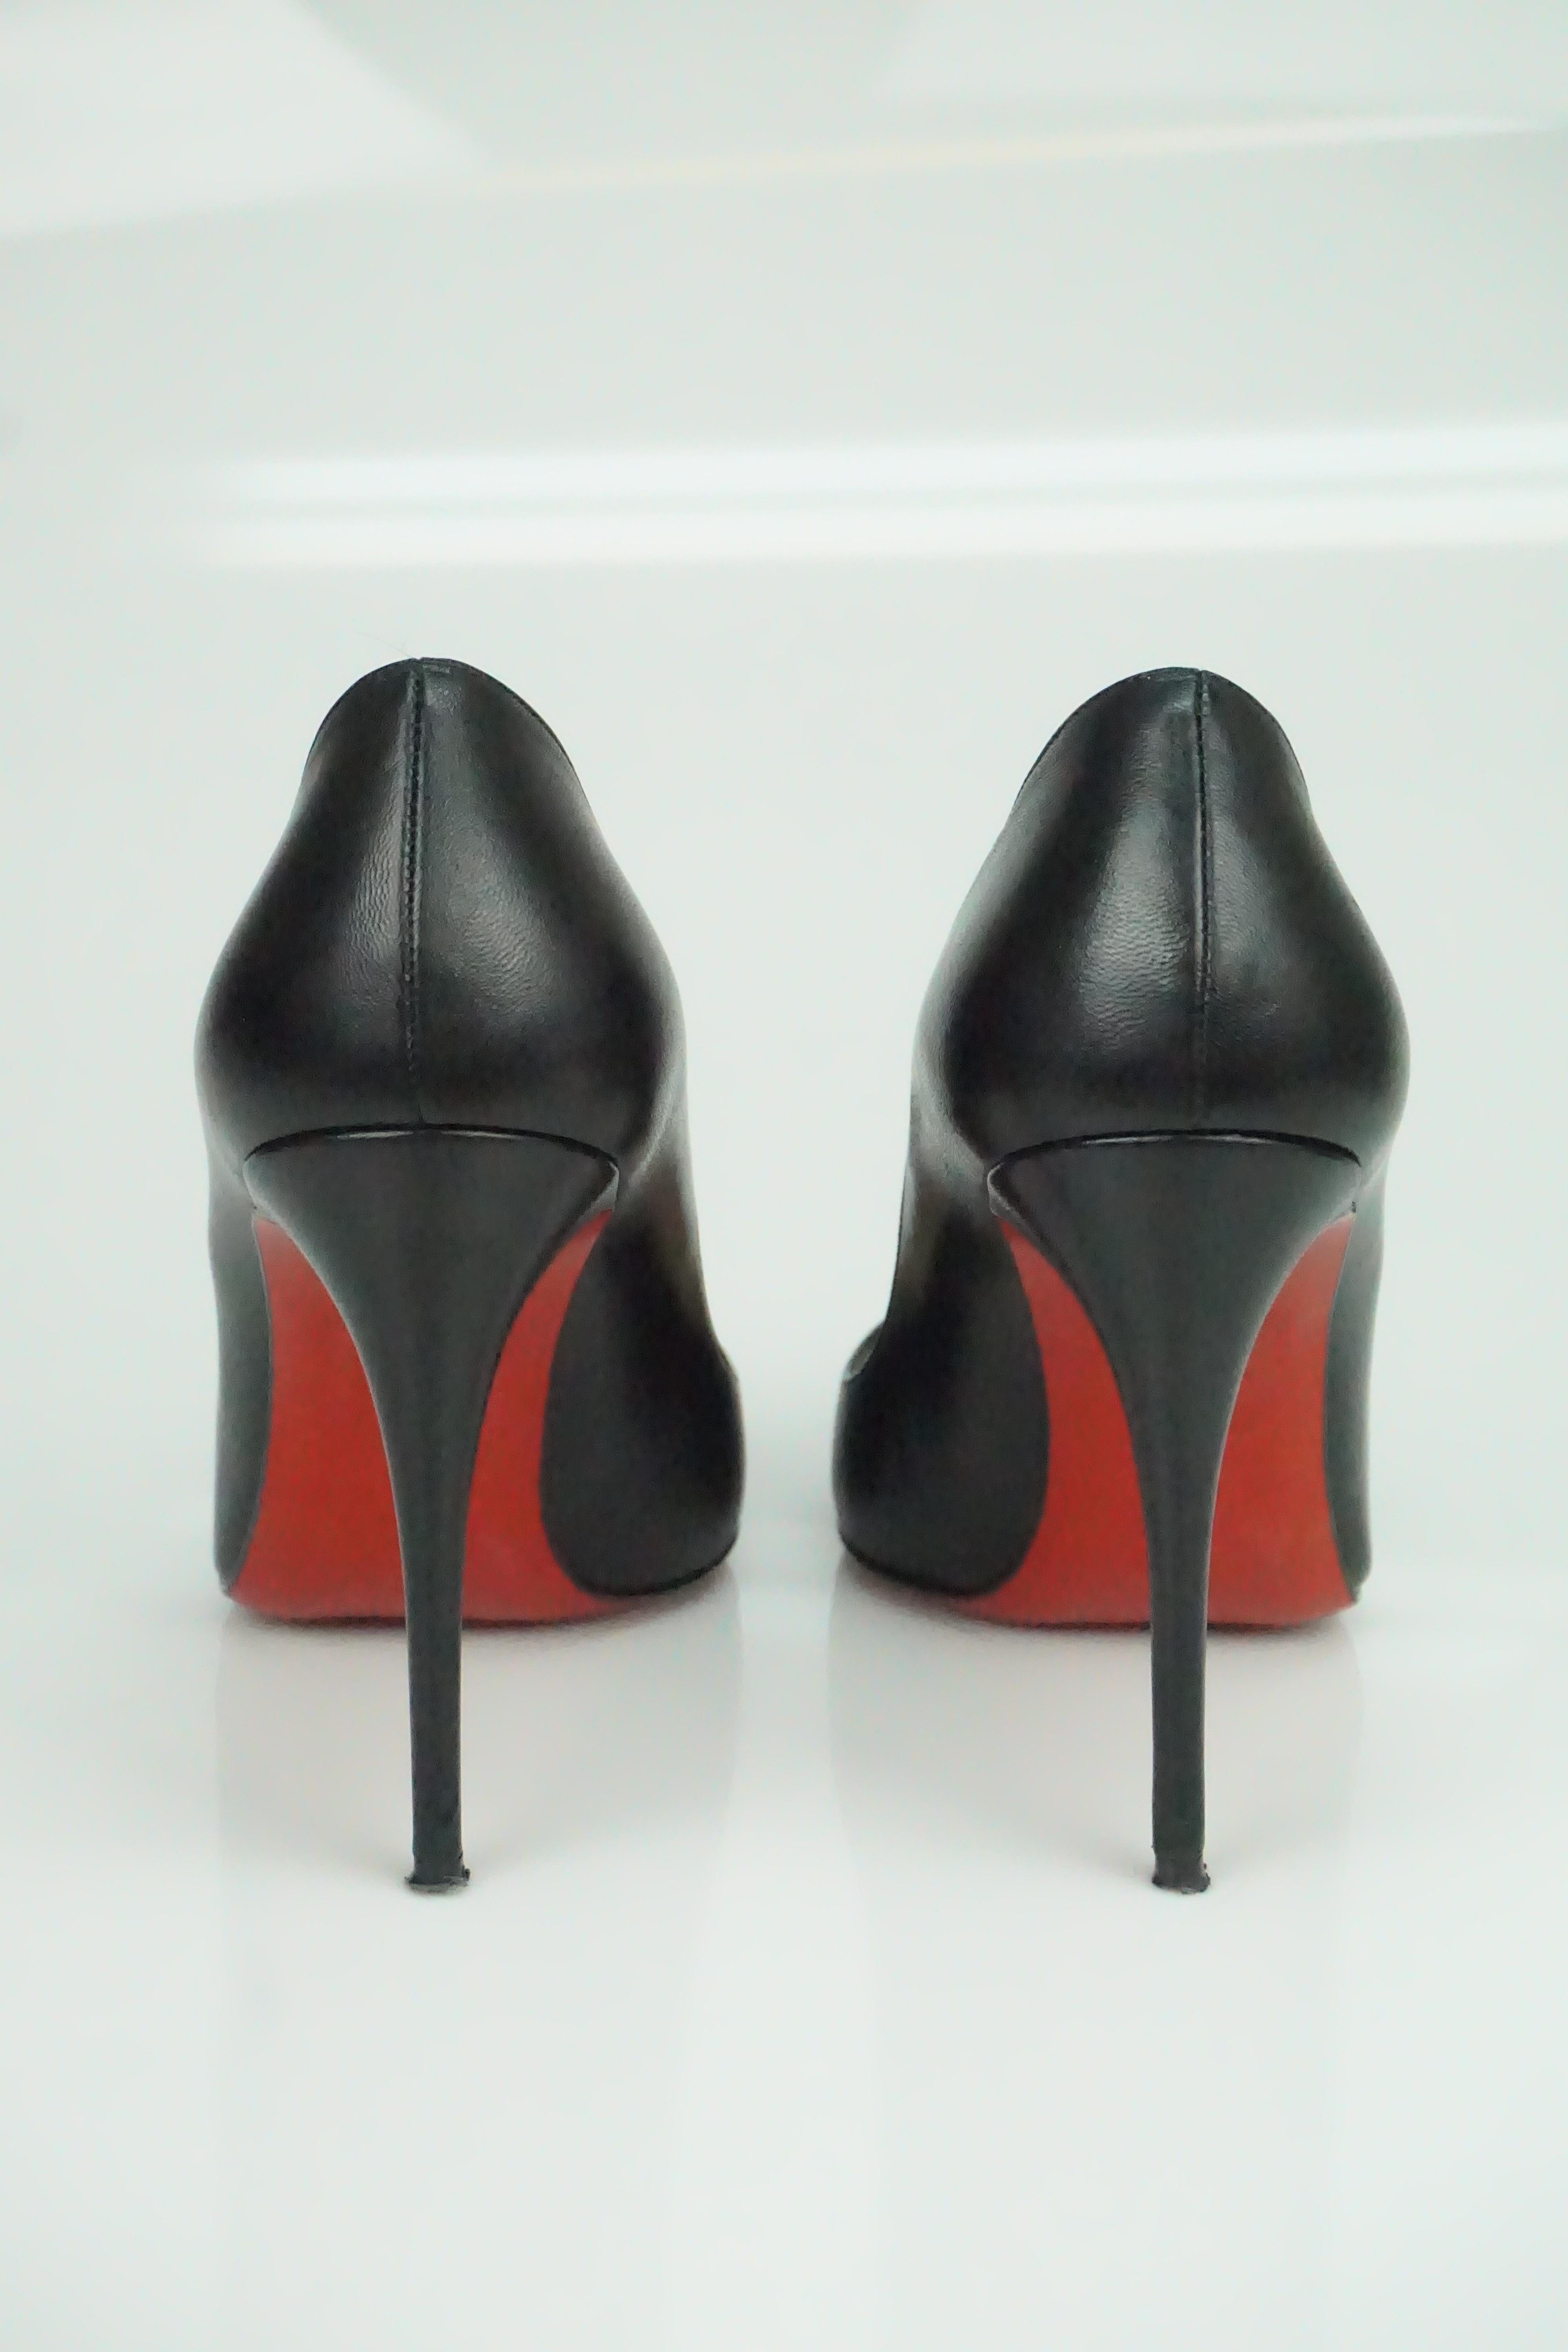 Women's Christian Louboutin Black Leather Pumps w/ Pointed Toe - 36.5